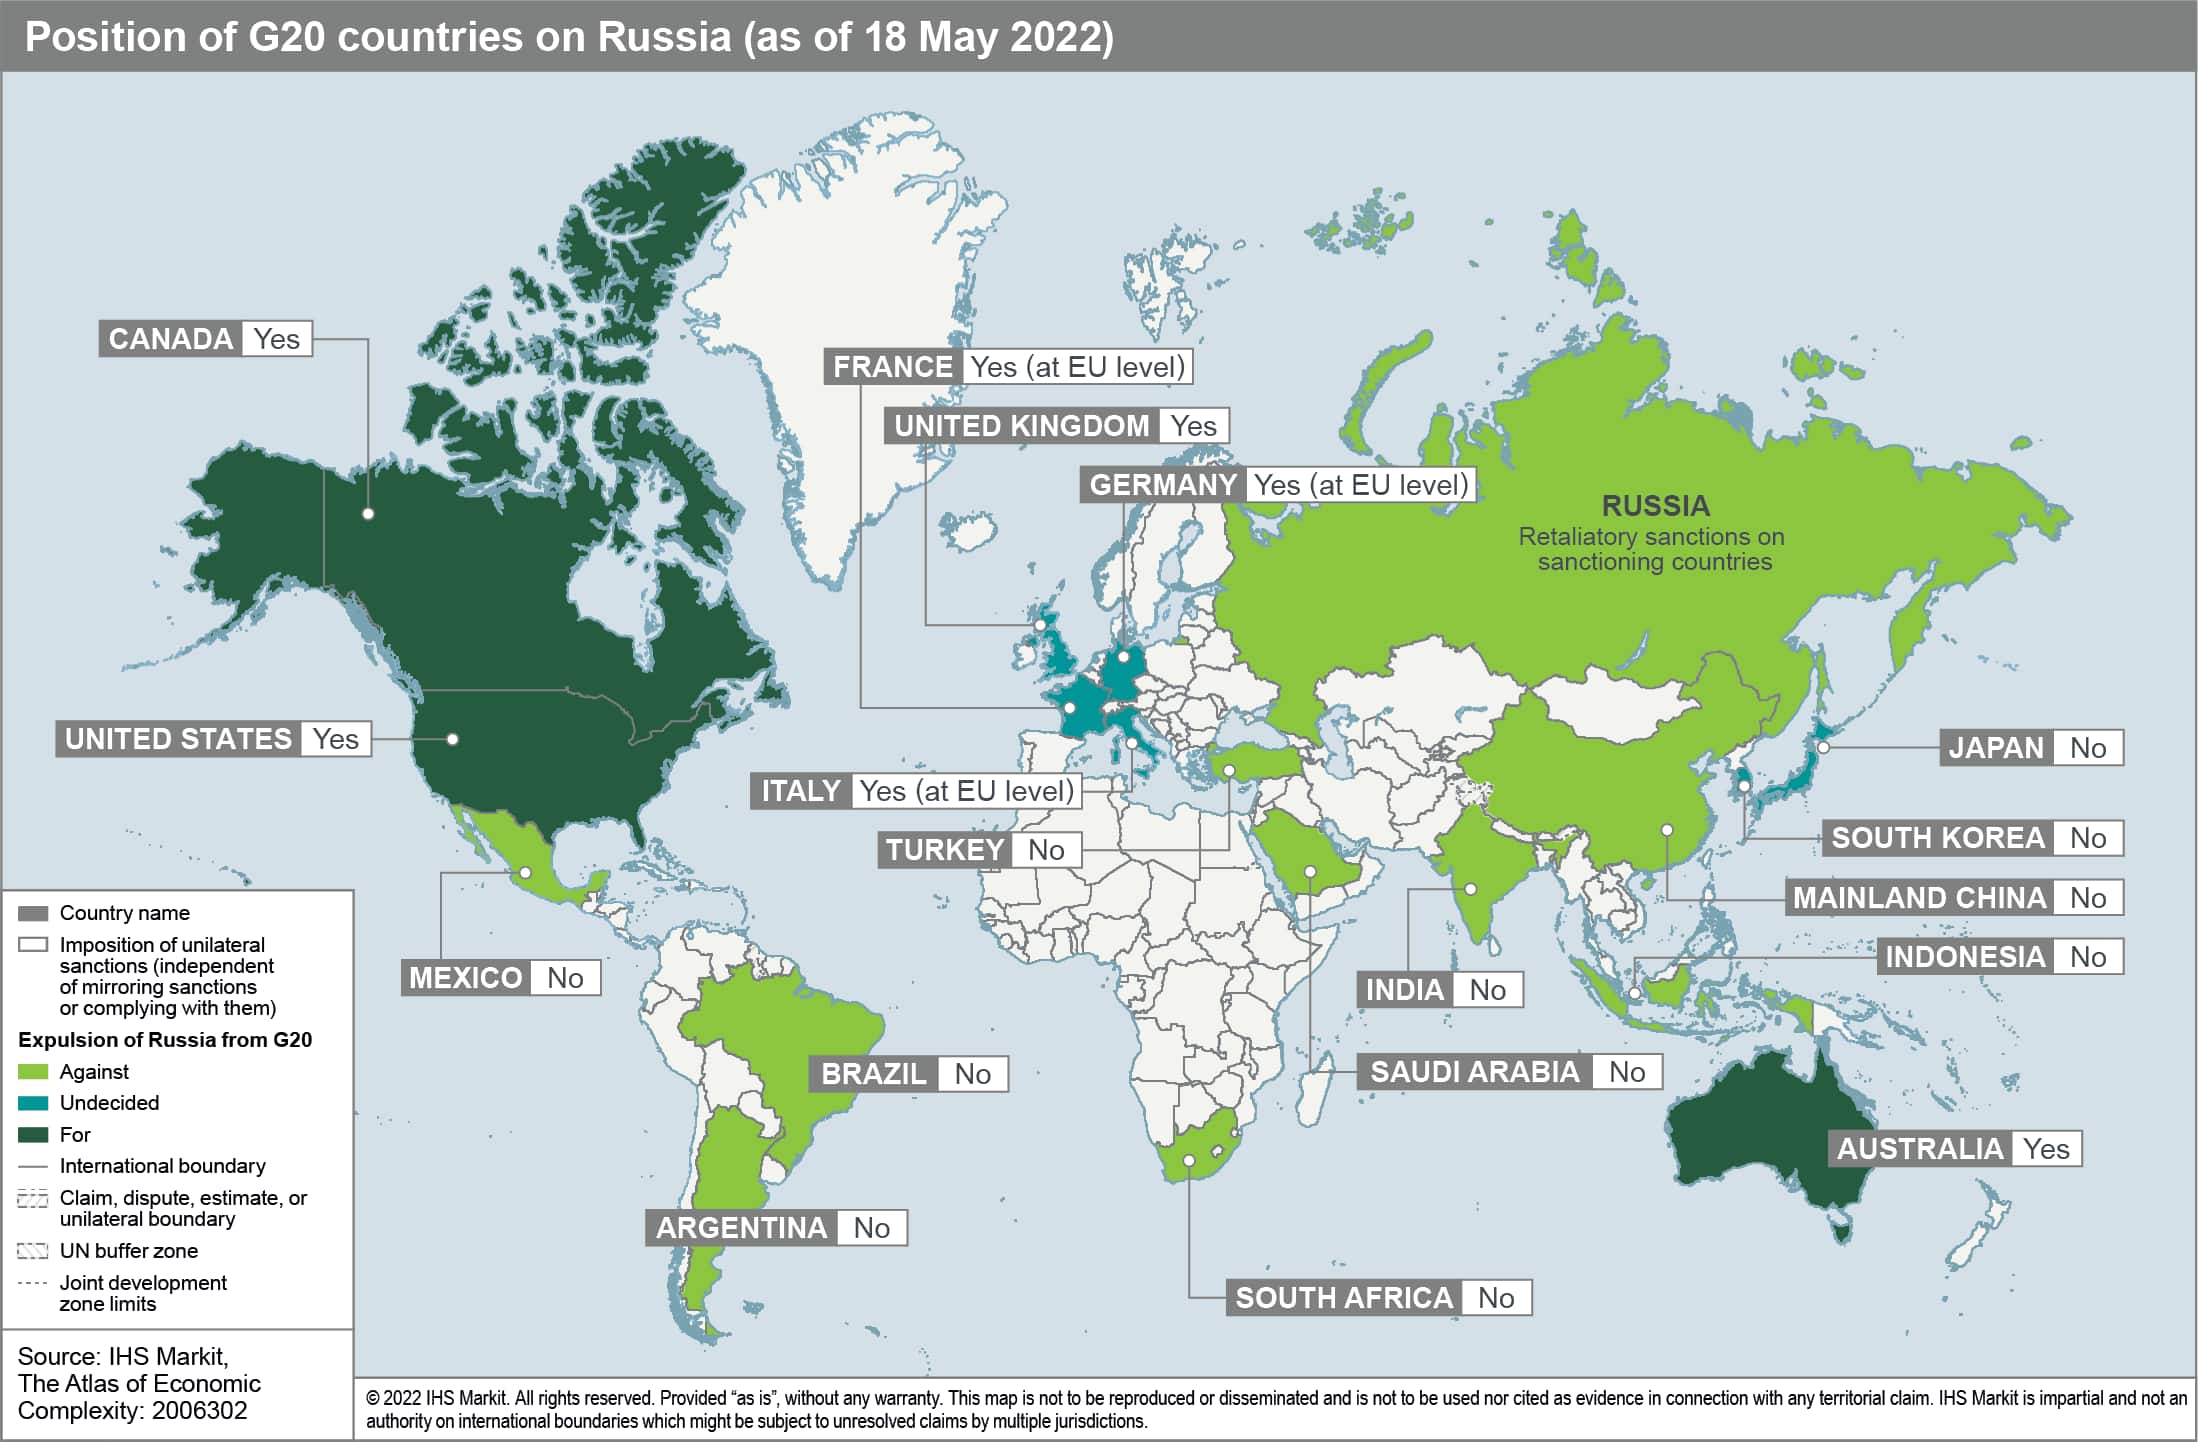 The G20s positions on Russia as of May 2022